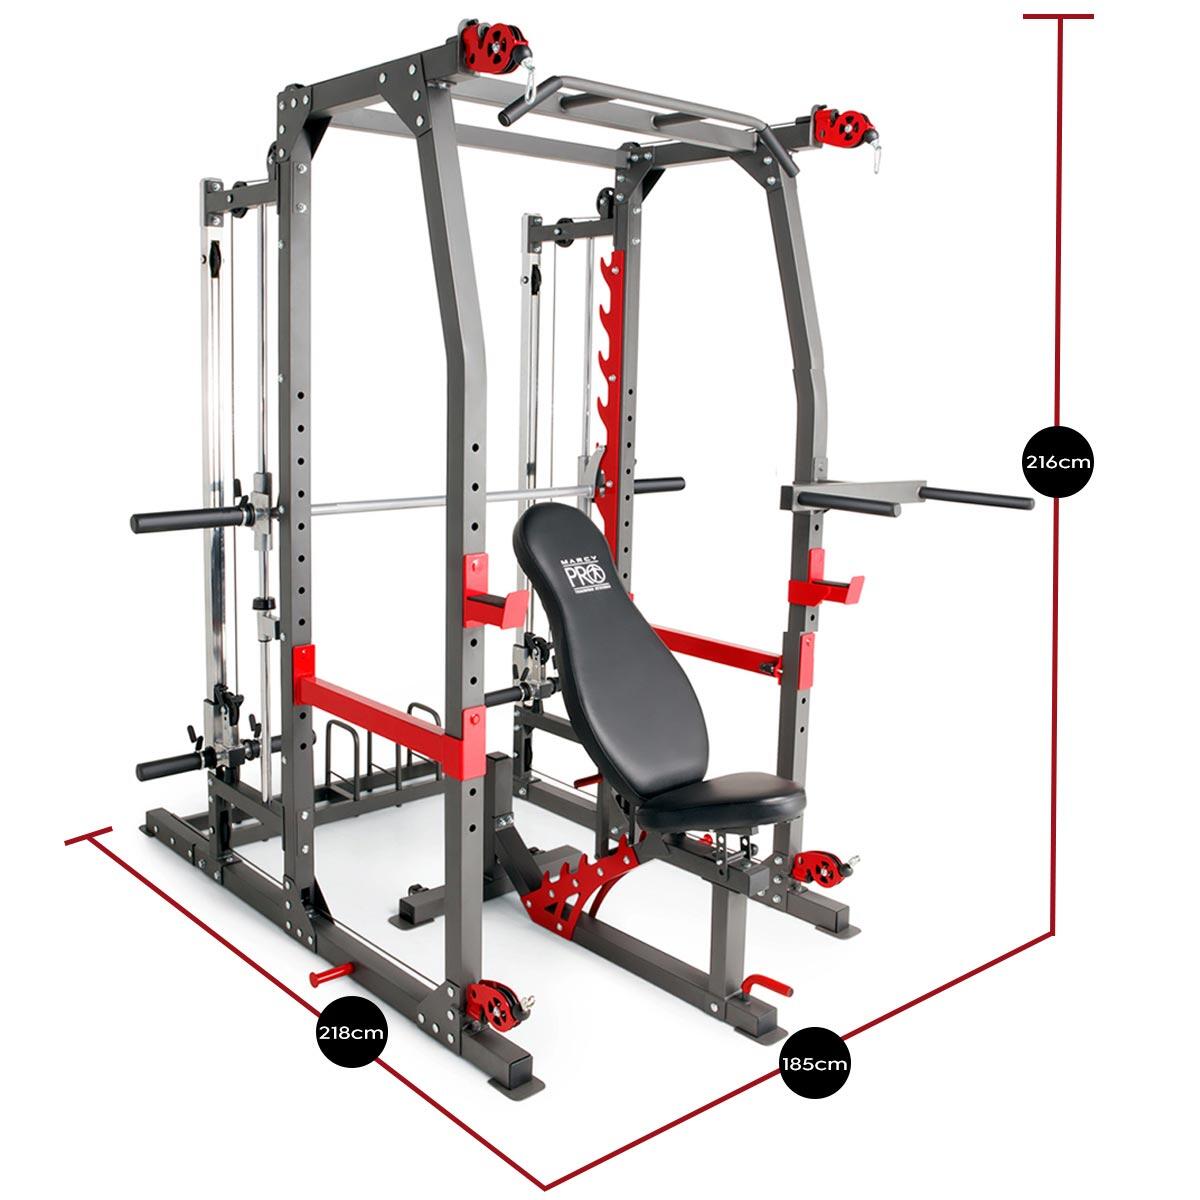 MARCY PRO SM4903 MULTI GYM CAGE SMITH MACHINE & ADJUSTABLE WEIGHT BENCH 6/7